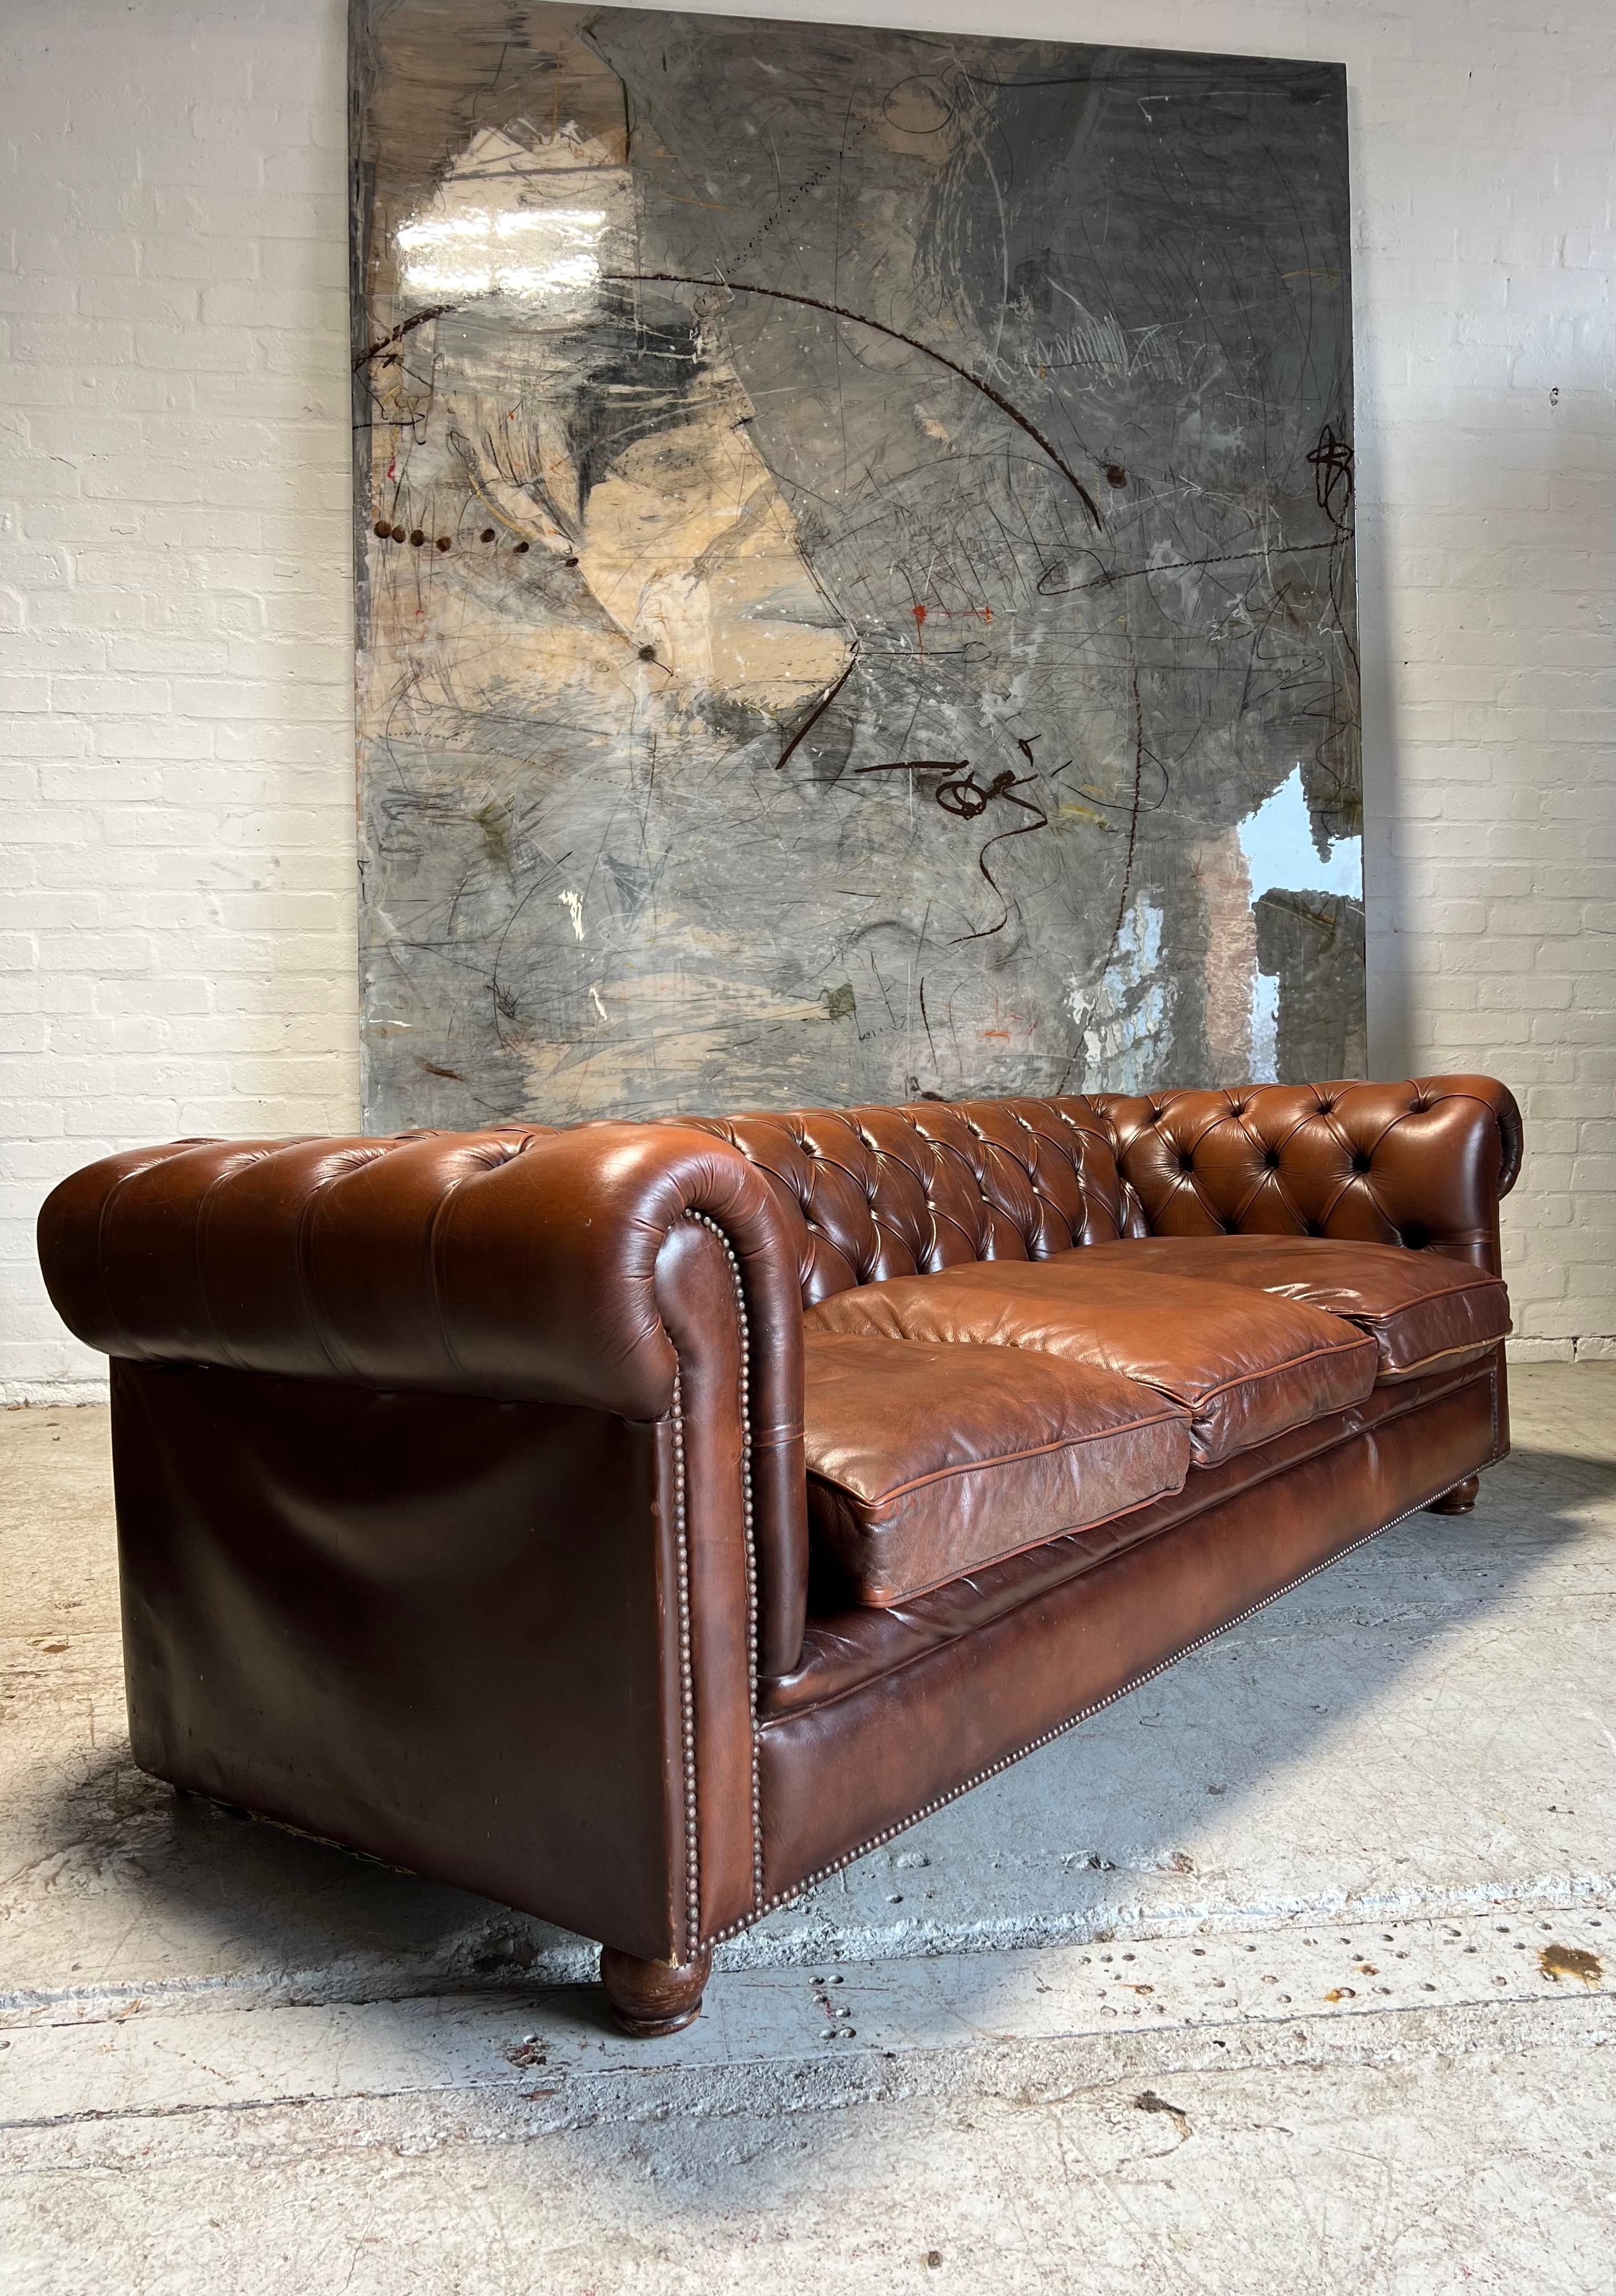 We were very fortunate to acquire a full collection of pieces from a beautiful country house on the south coast.

The full collection was purchased approximately 50 years ago and consists of the following:-

Generous 3 seat sofa 210cm - £2,699

2 x